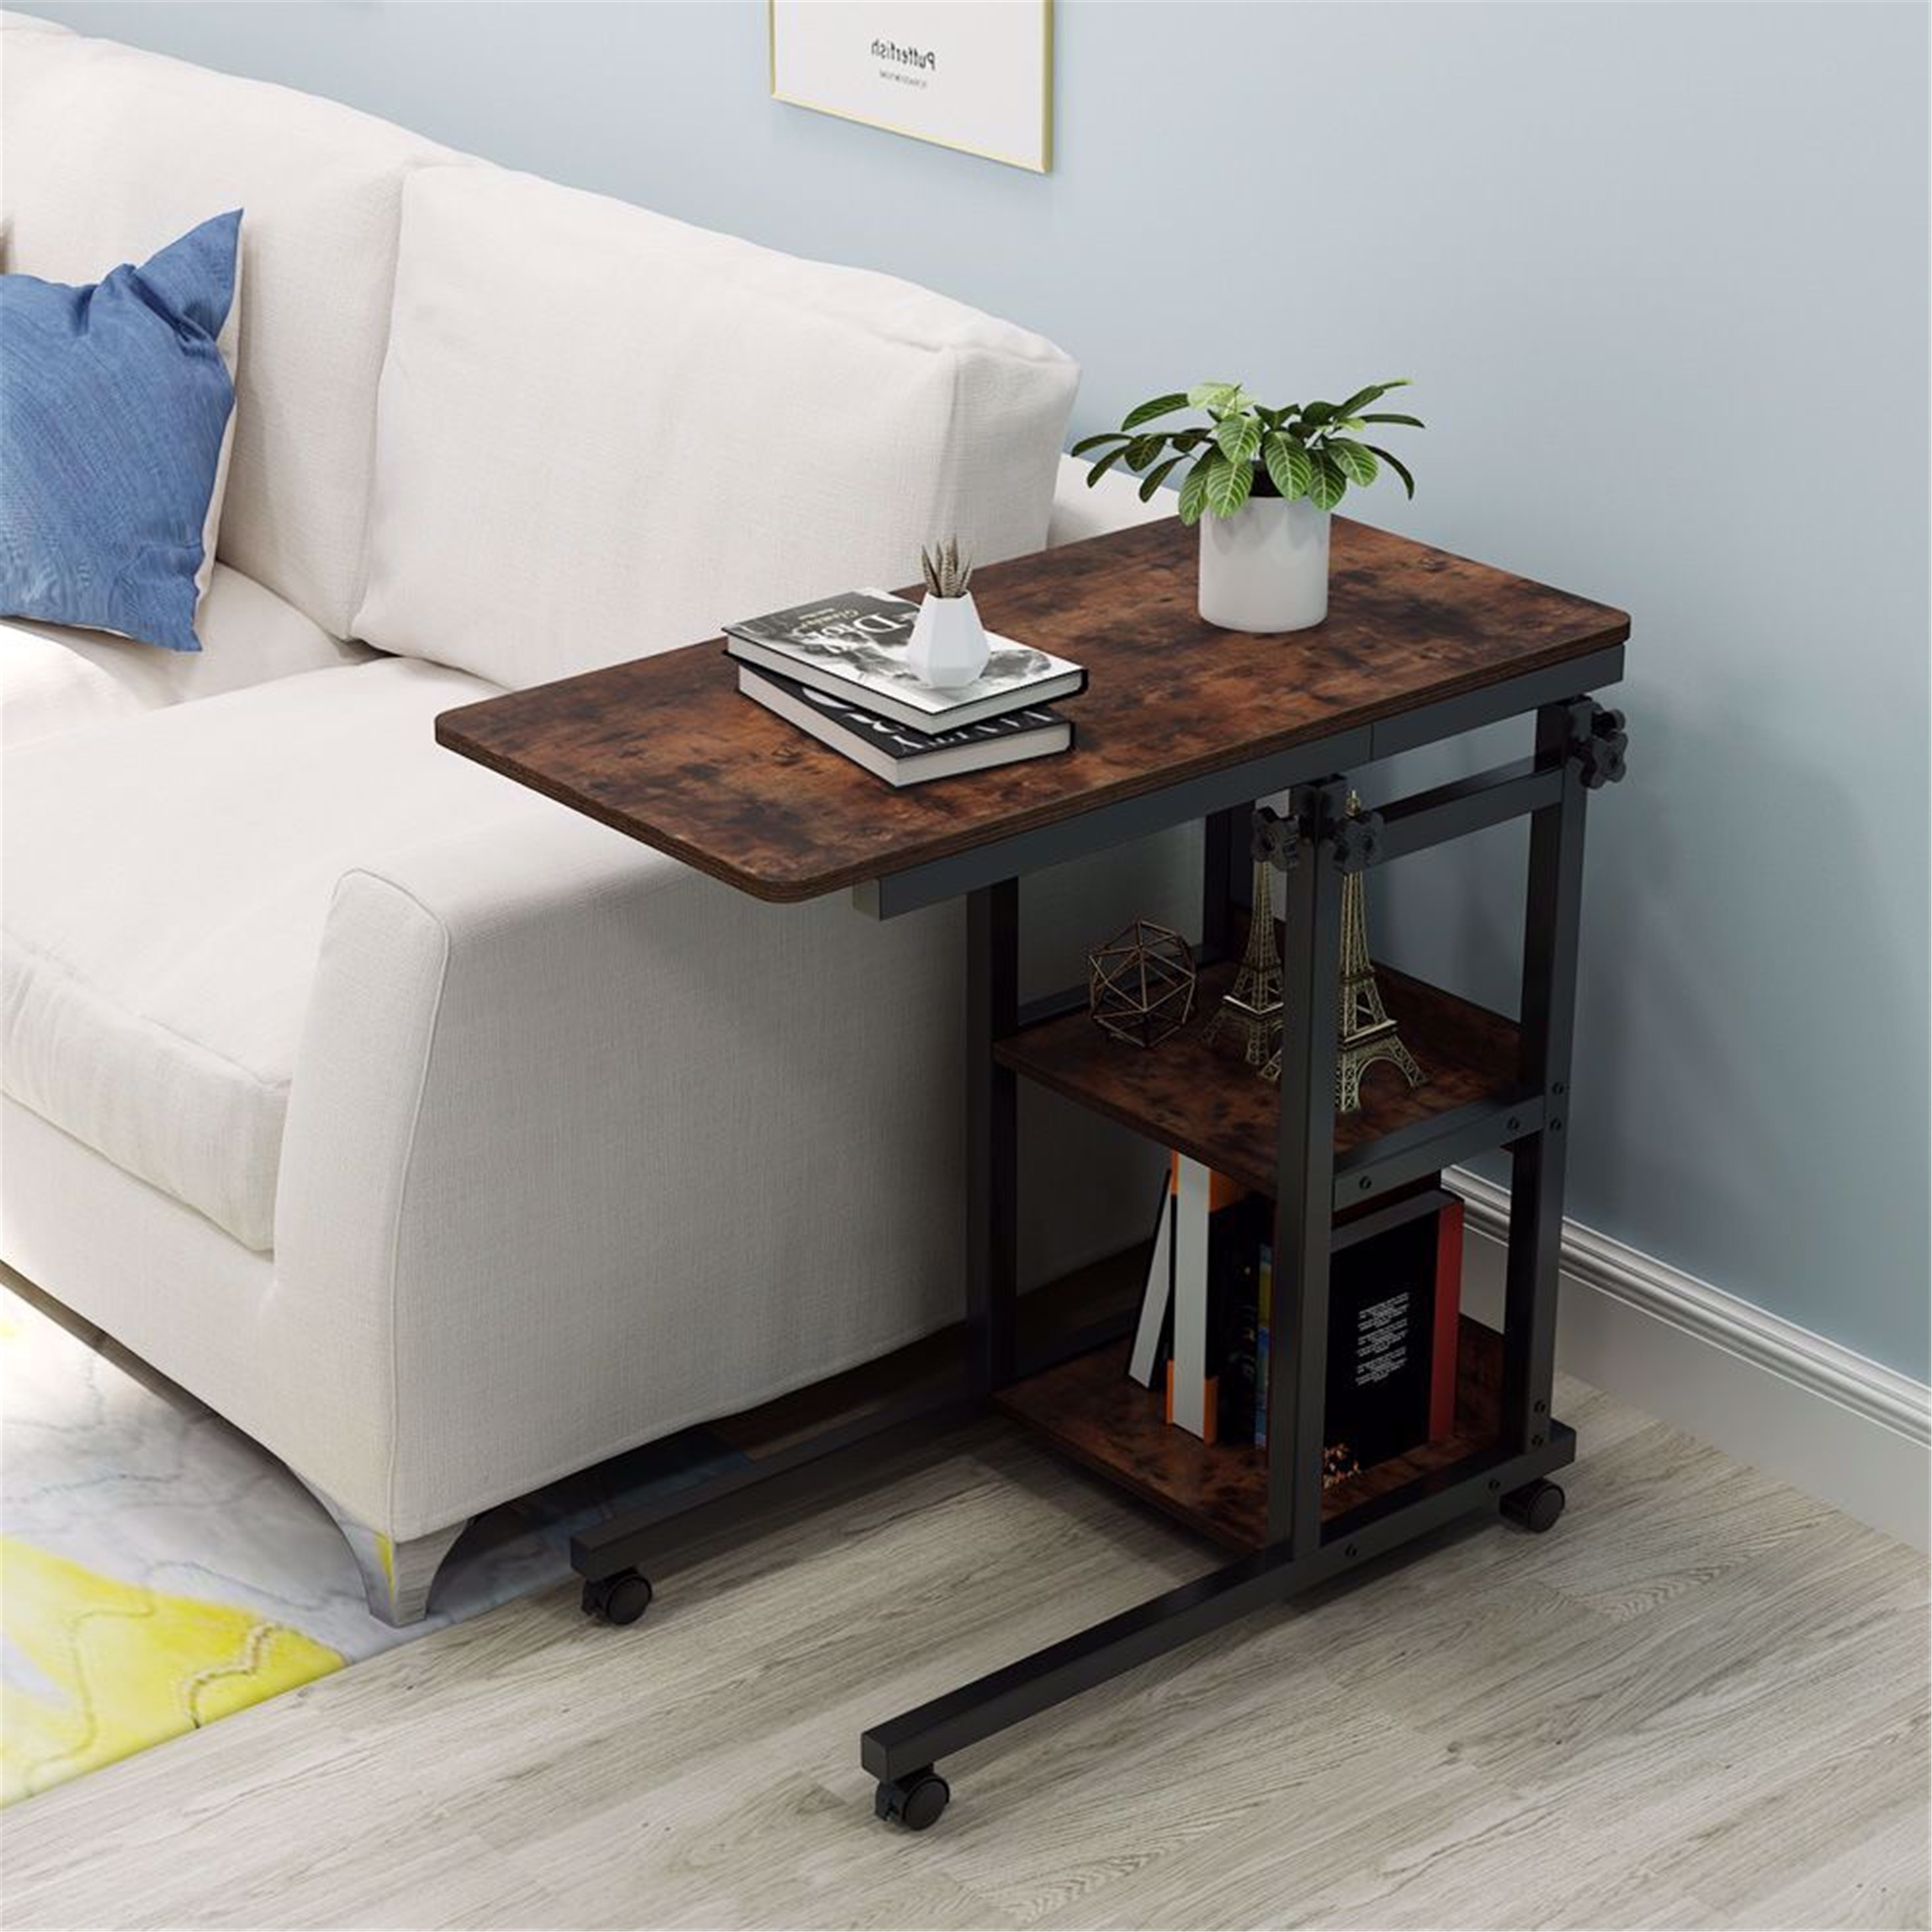 Snack Side Table, Mobile End Table Height Adjustable Bedside Table